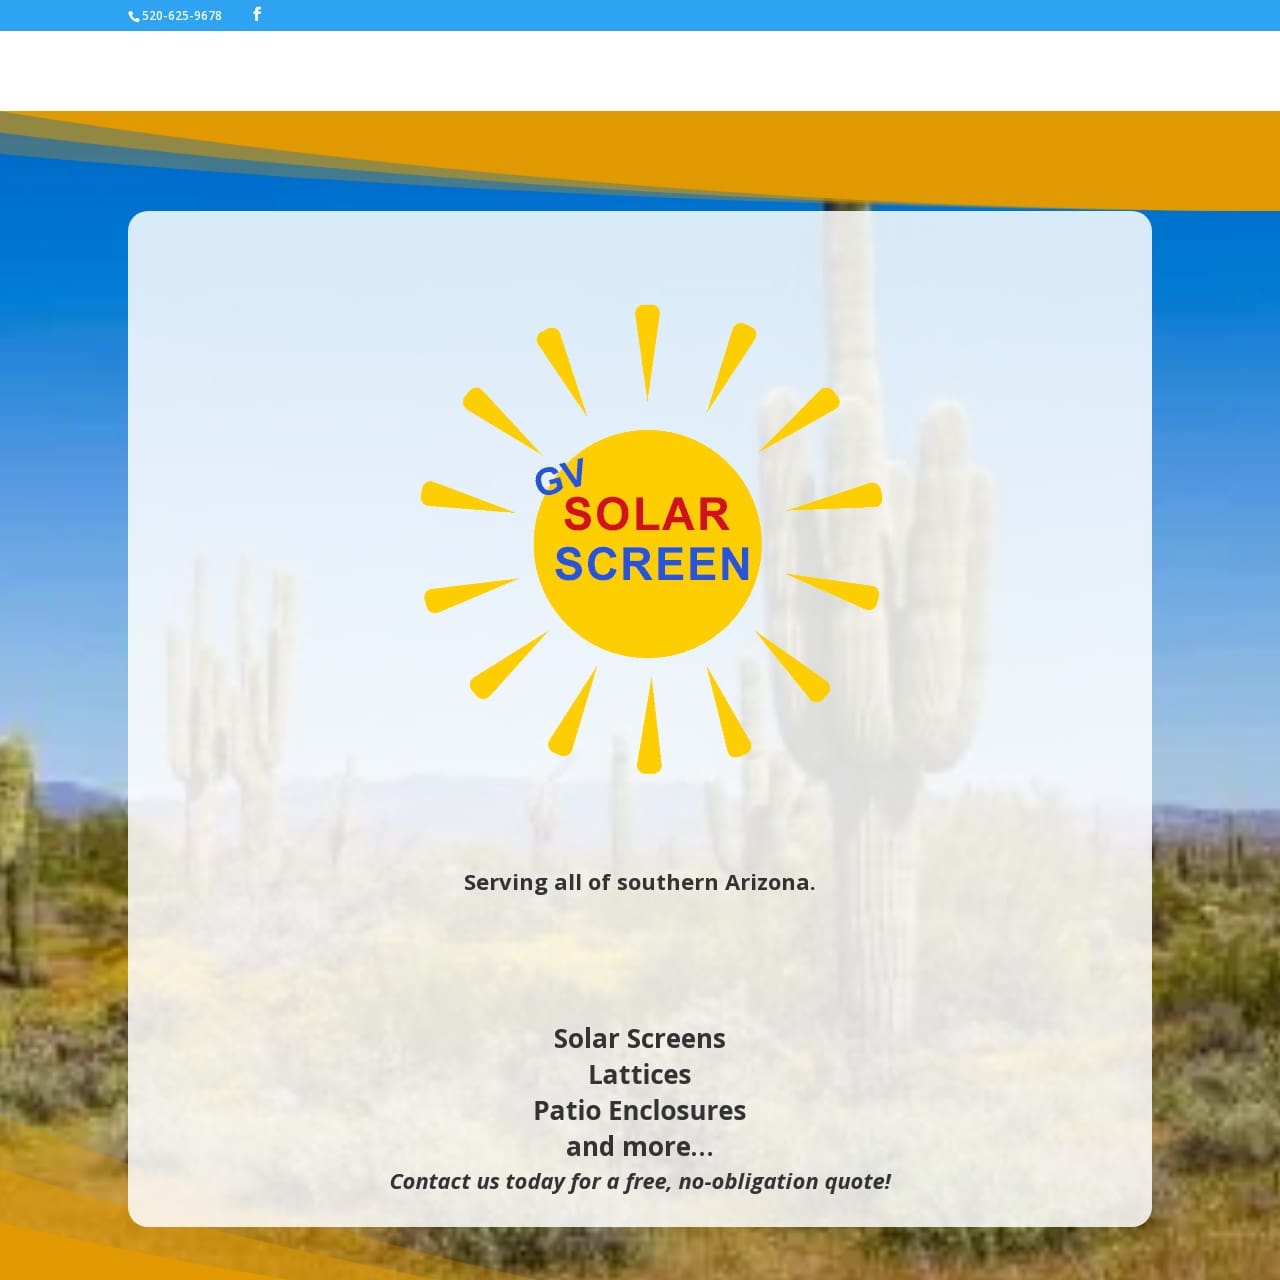 Experience the harmony of aesthetics and sustainability as Shield Bar Marketing updates the logo and designs a captivating landing page for Green Valley Solar Screens, providing prospective customers with valuable information and a glimpse into their energy-efficient solutions.